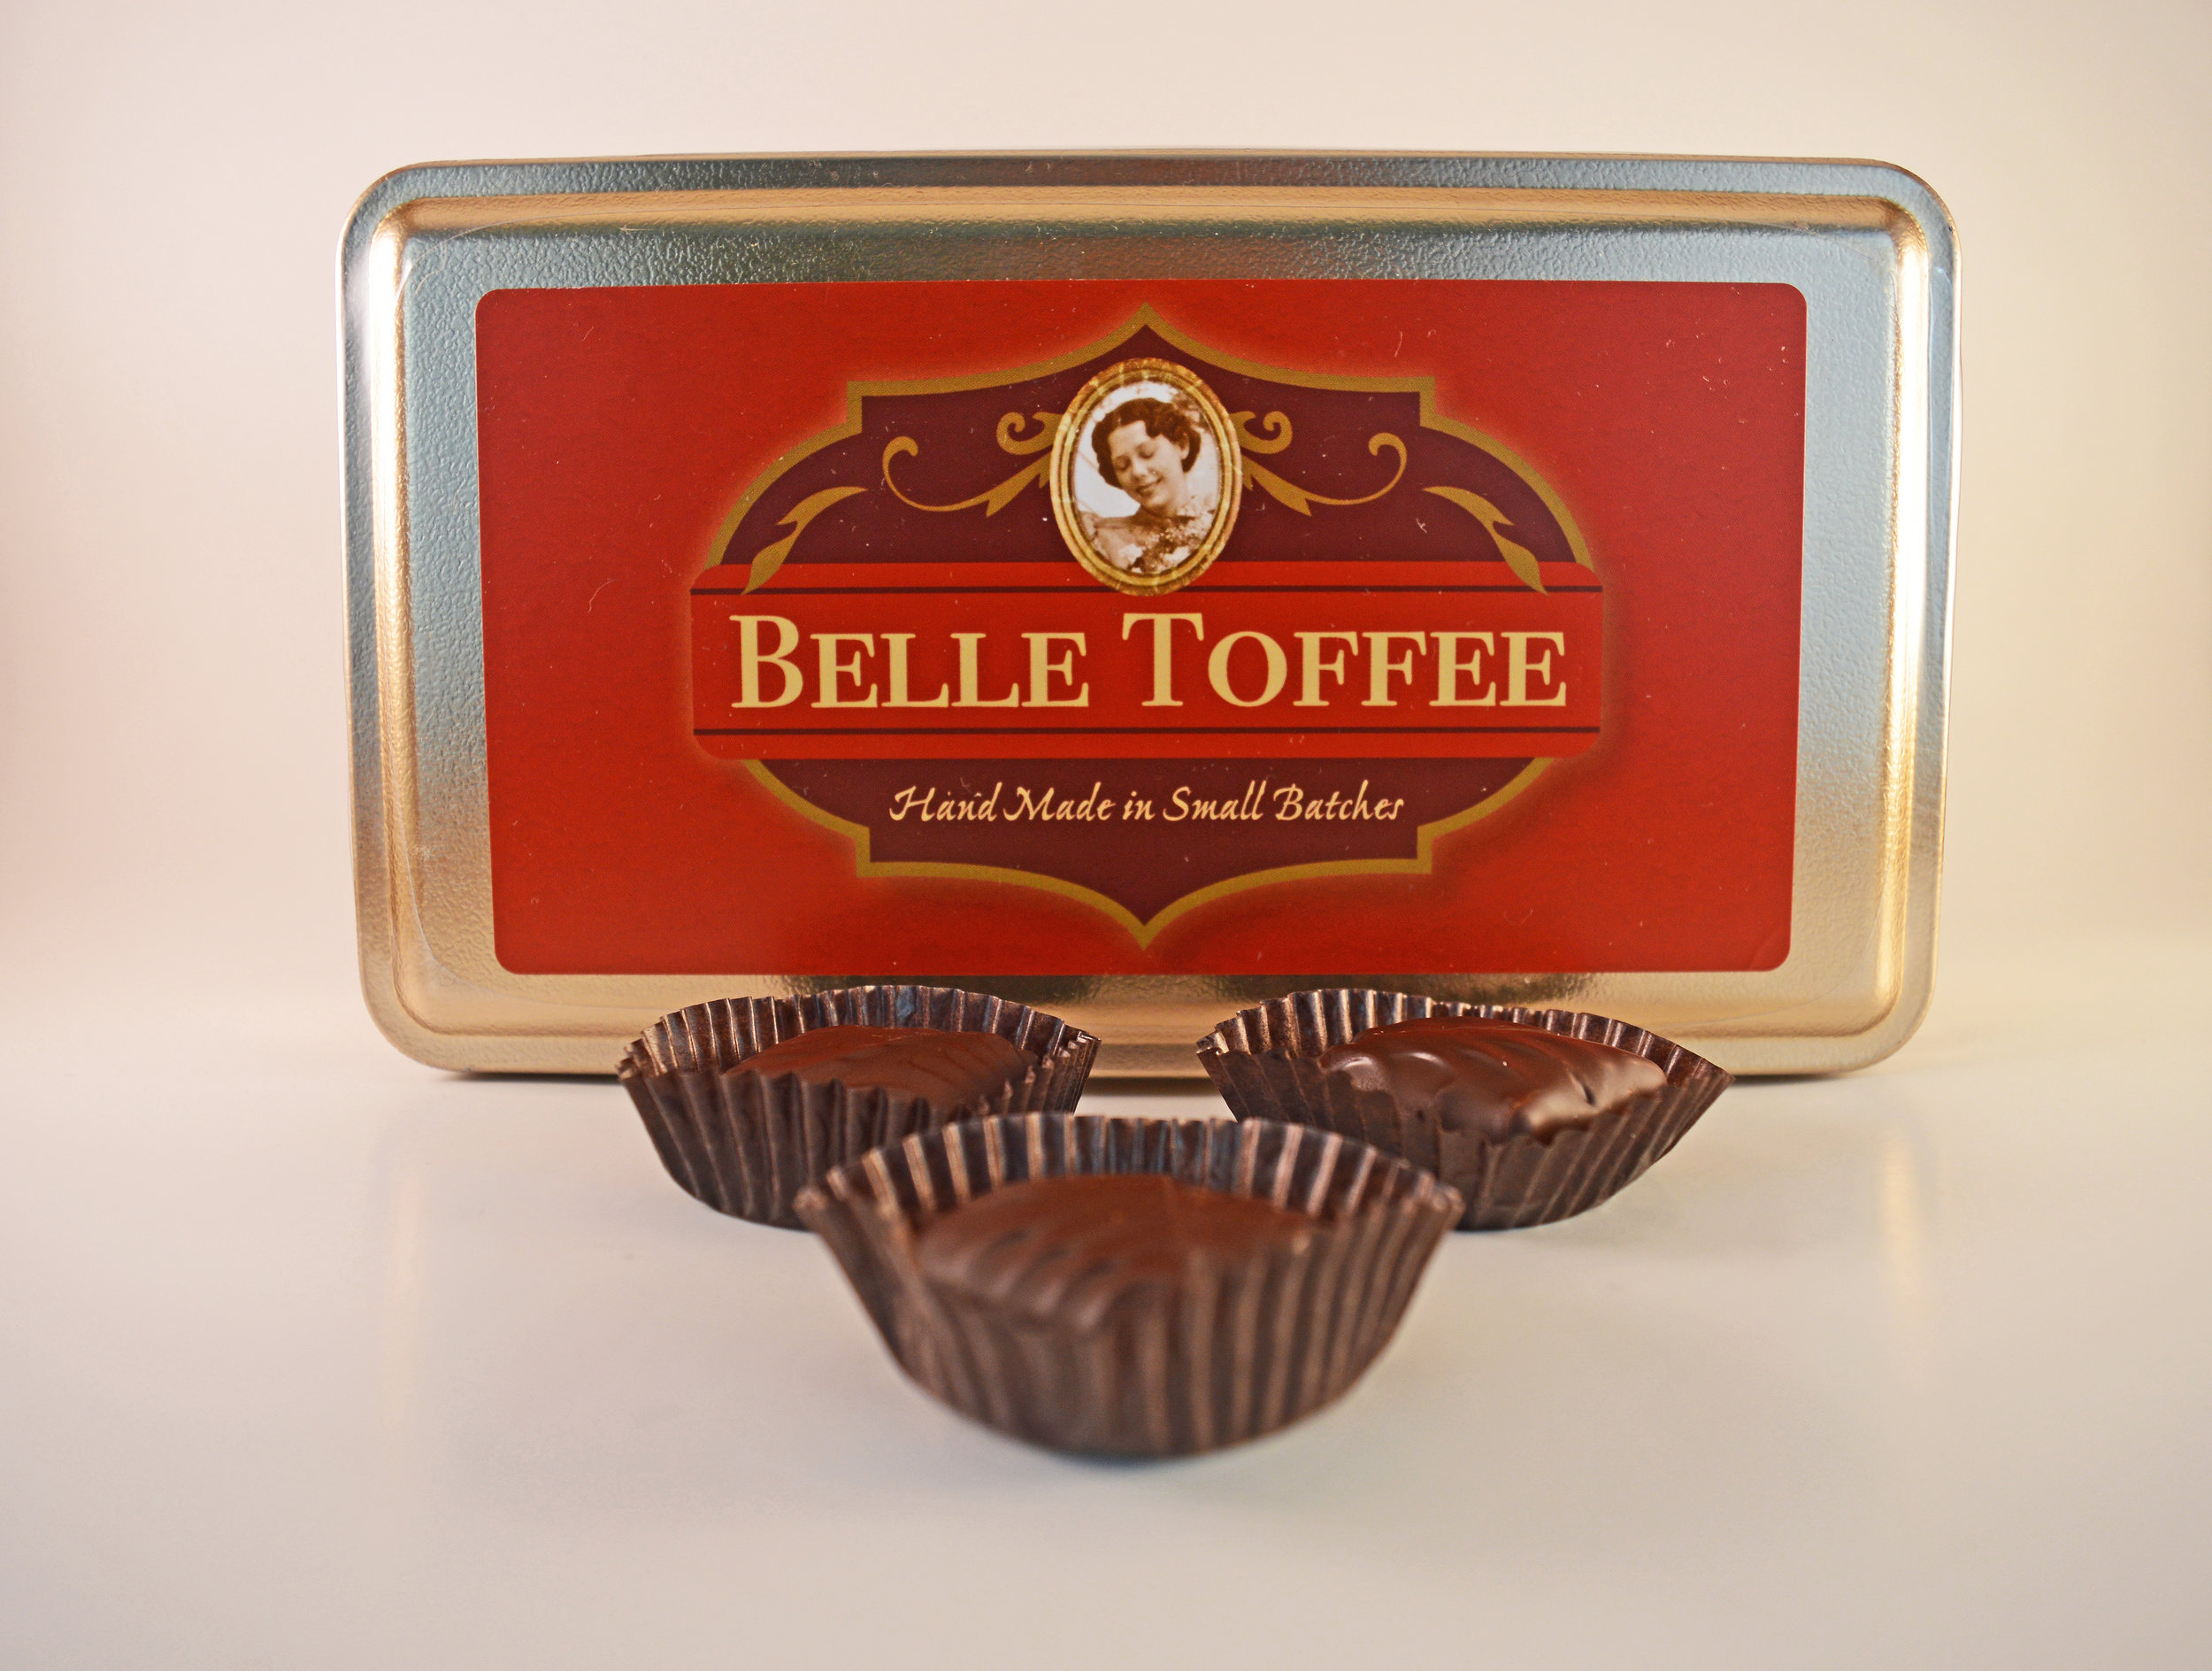 Tin of Belle Toffee